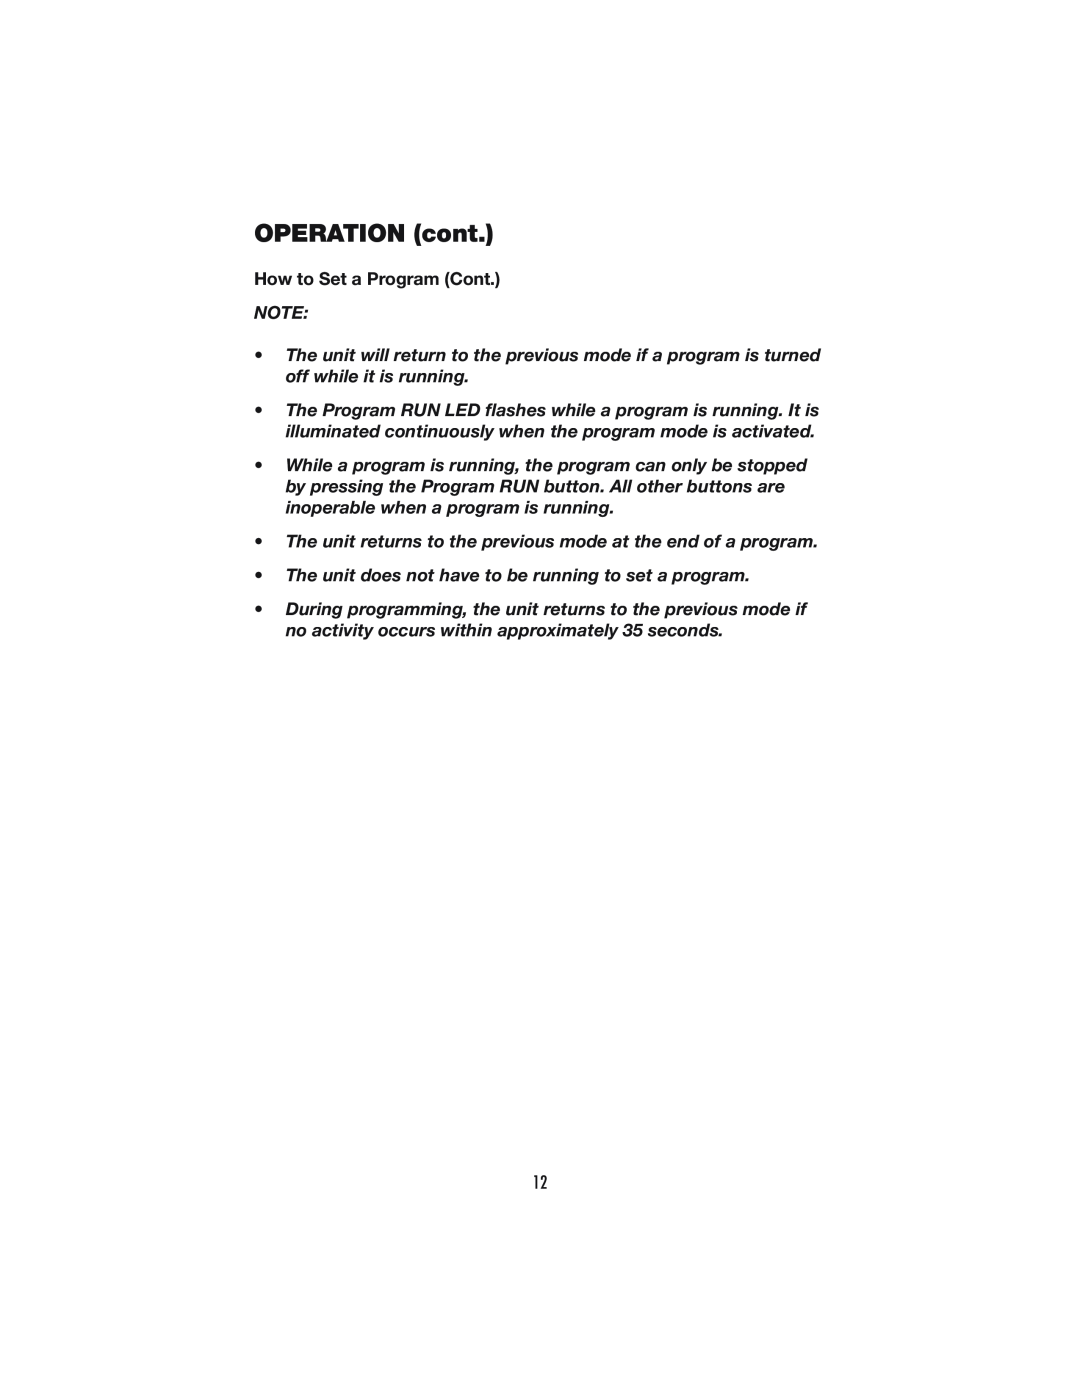 Denso OFFICE PRO 12, OFFICE PRO 24 operation manual How to Set a Program Cont, OPERATION cont 